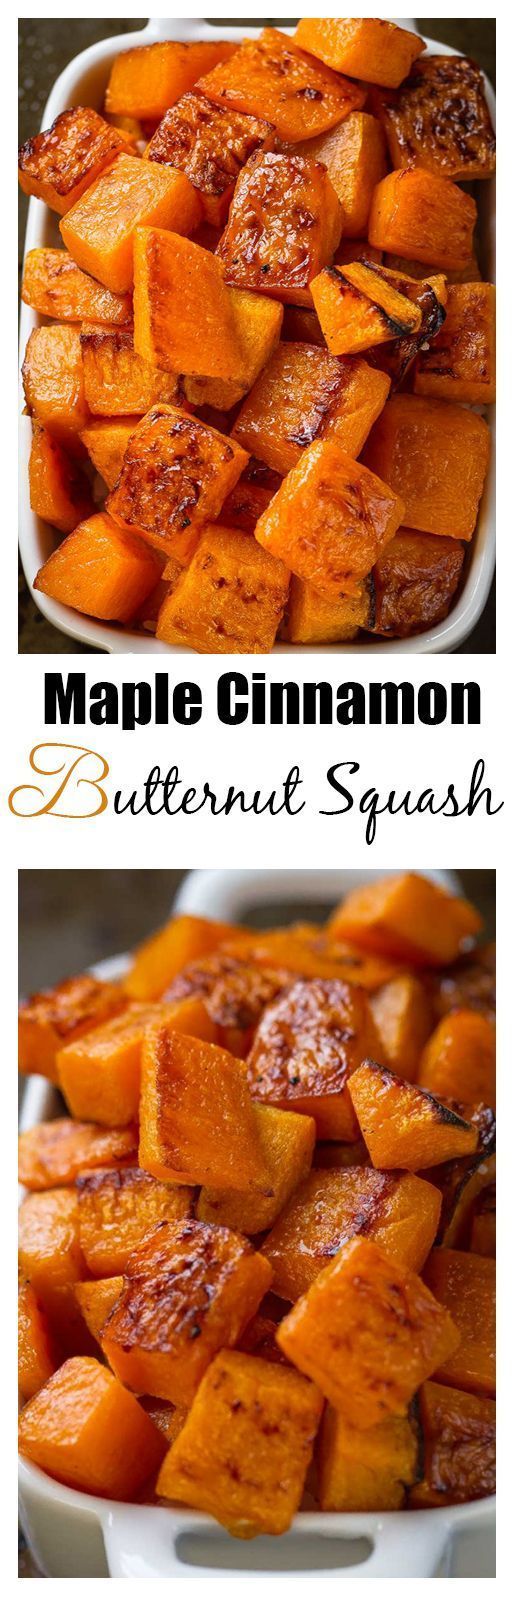 Maple Cinnamon Roasted Butternut Squash makes an easy, healthy & delicious sid